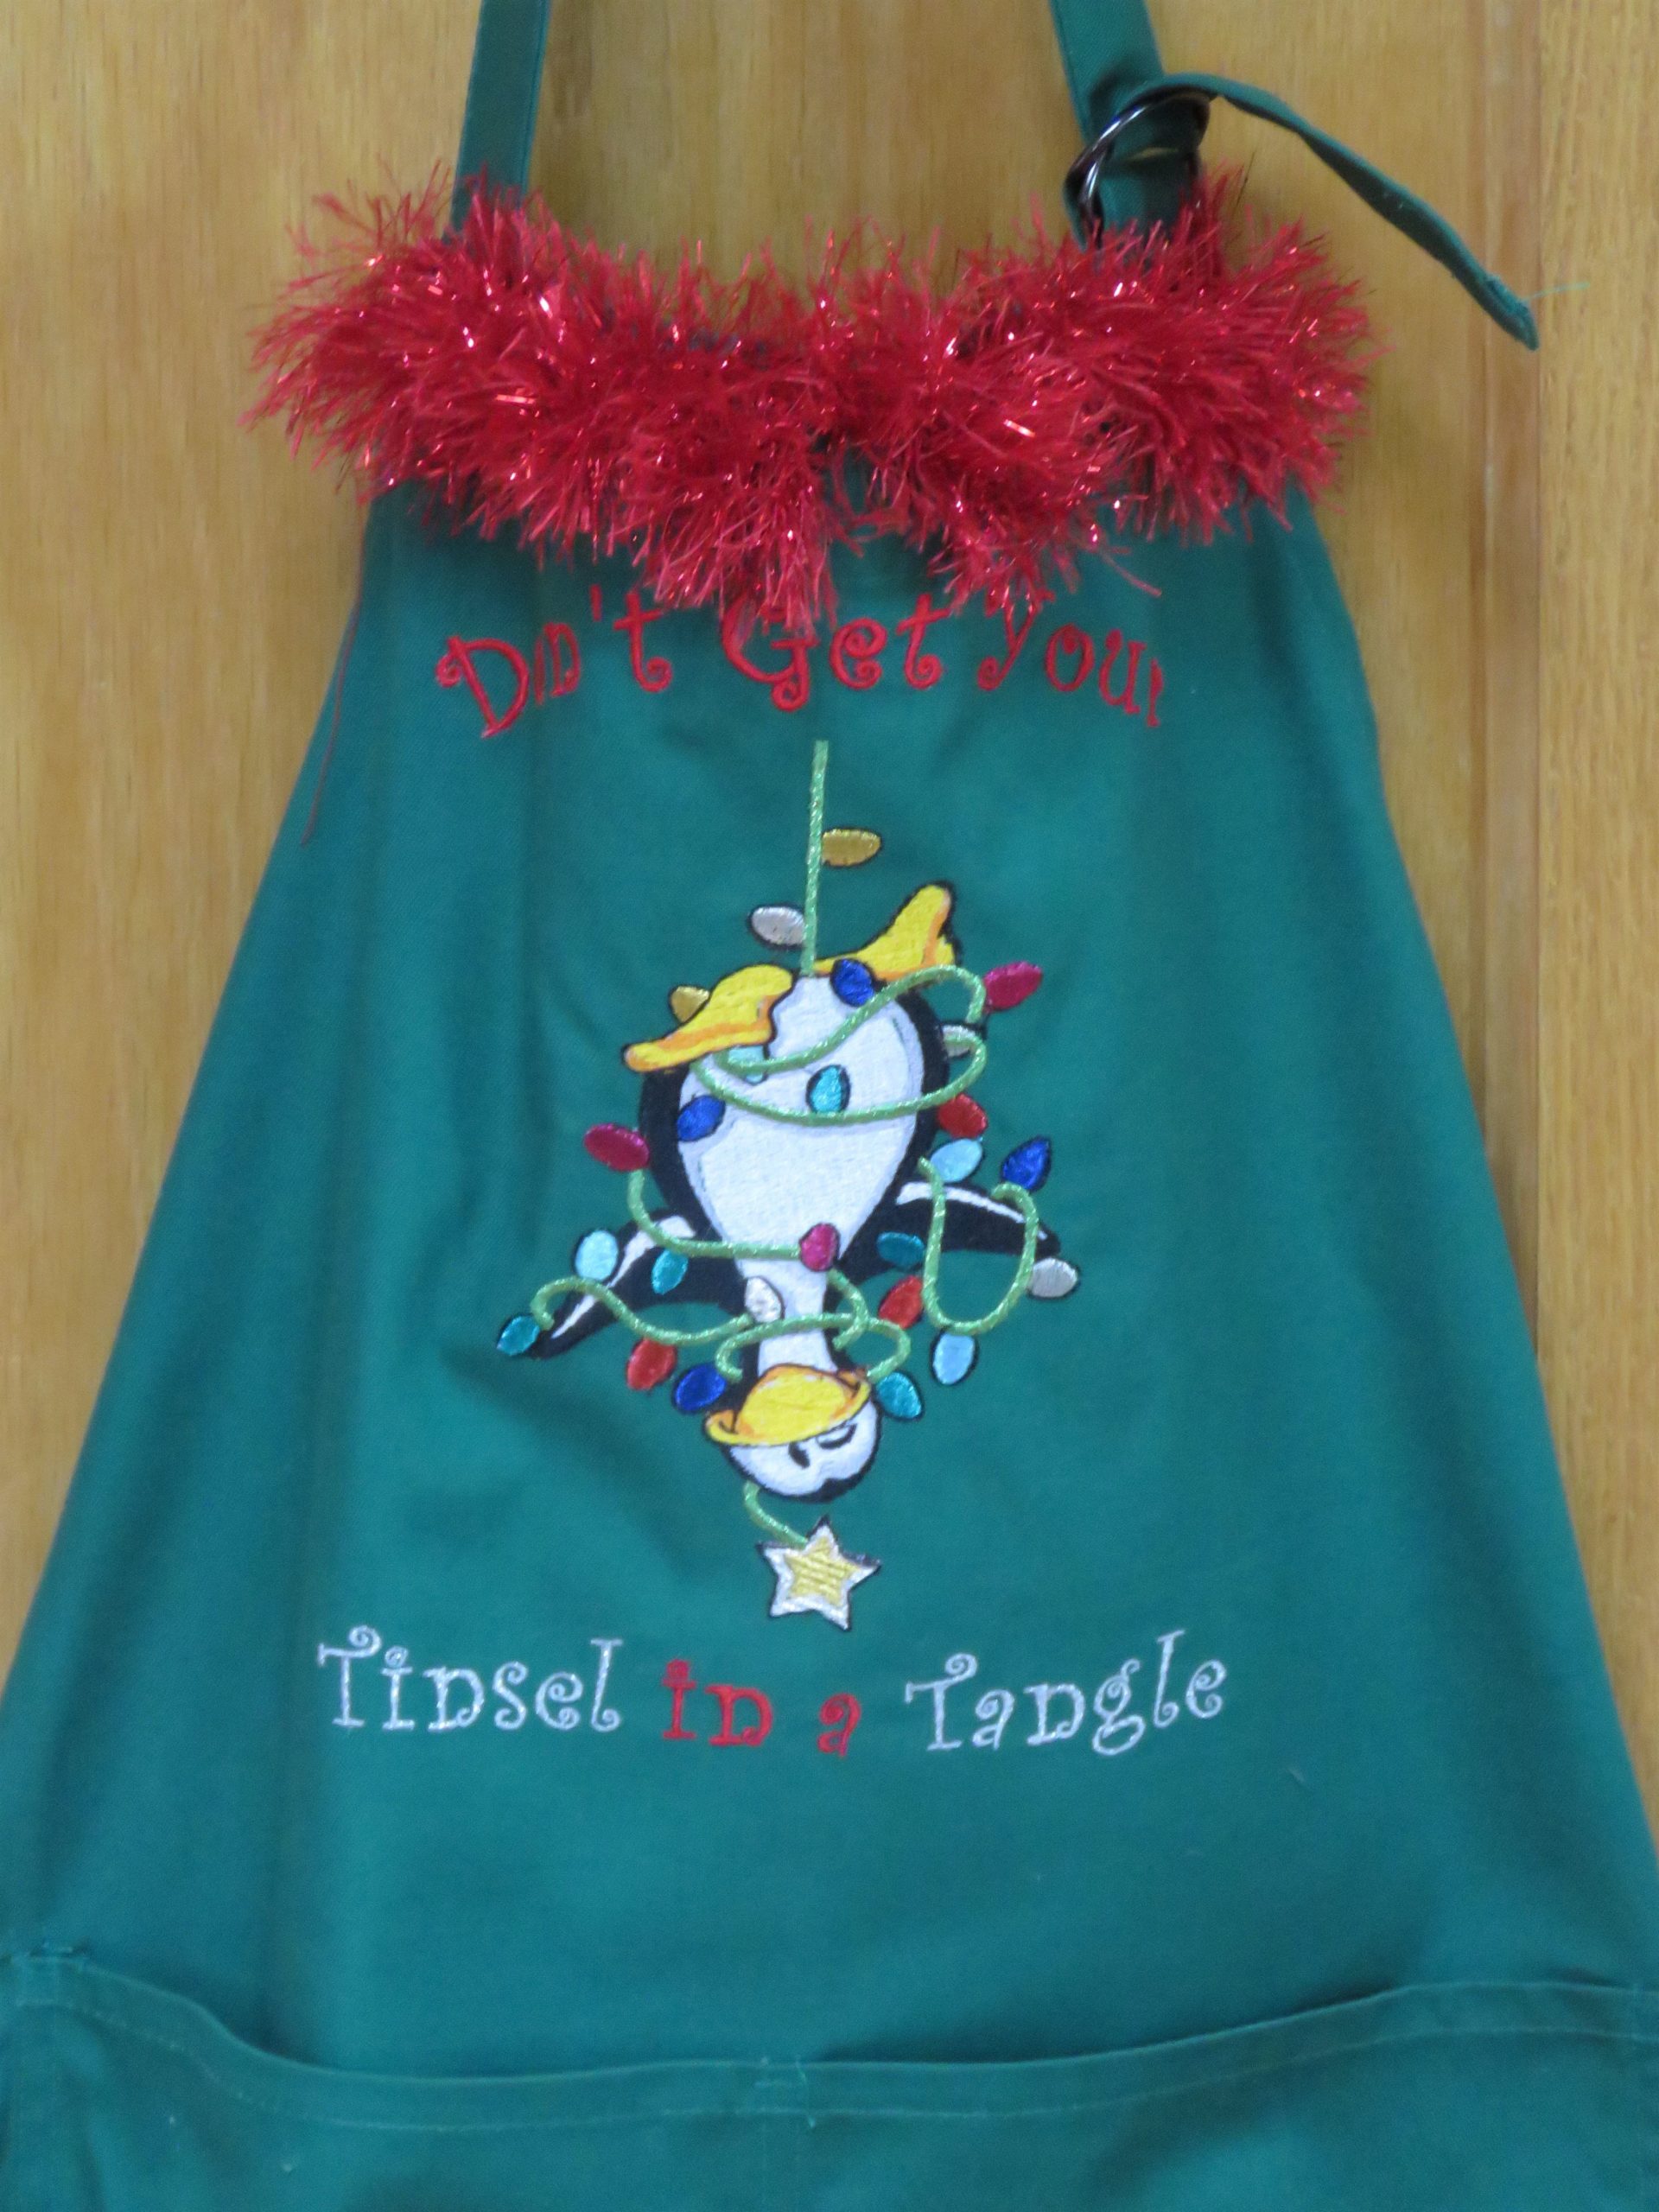 Don’t Get Your Tinsel in a Tangle: Embroidering With Metallic Thread